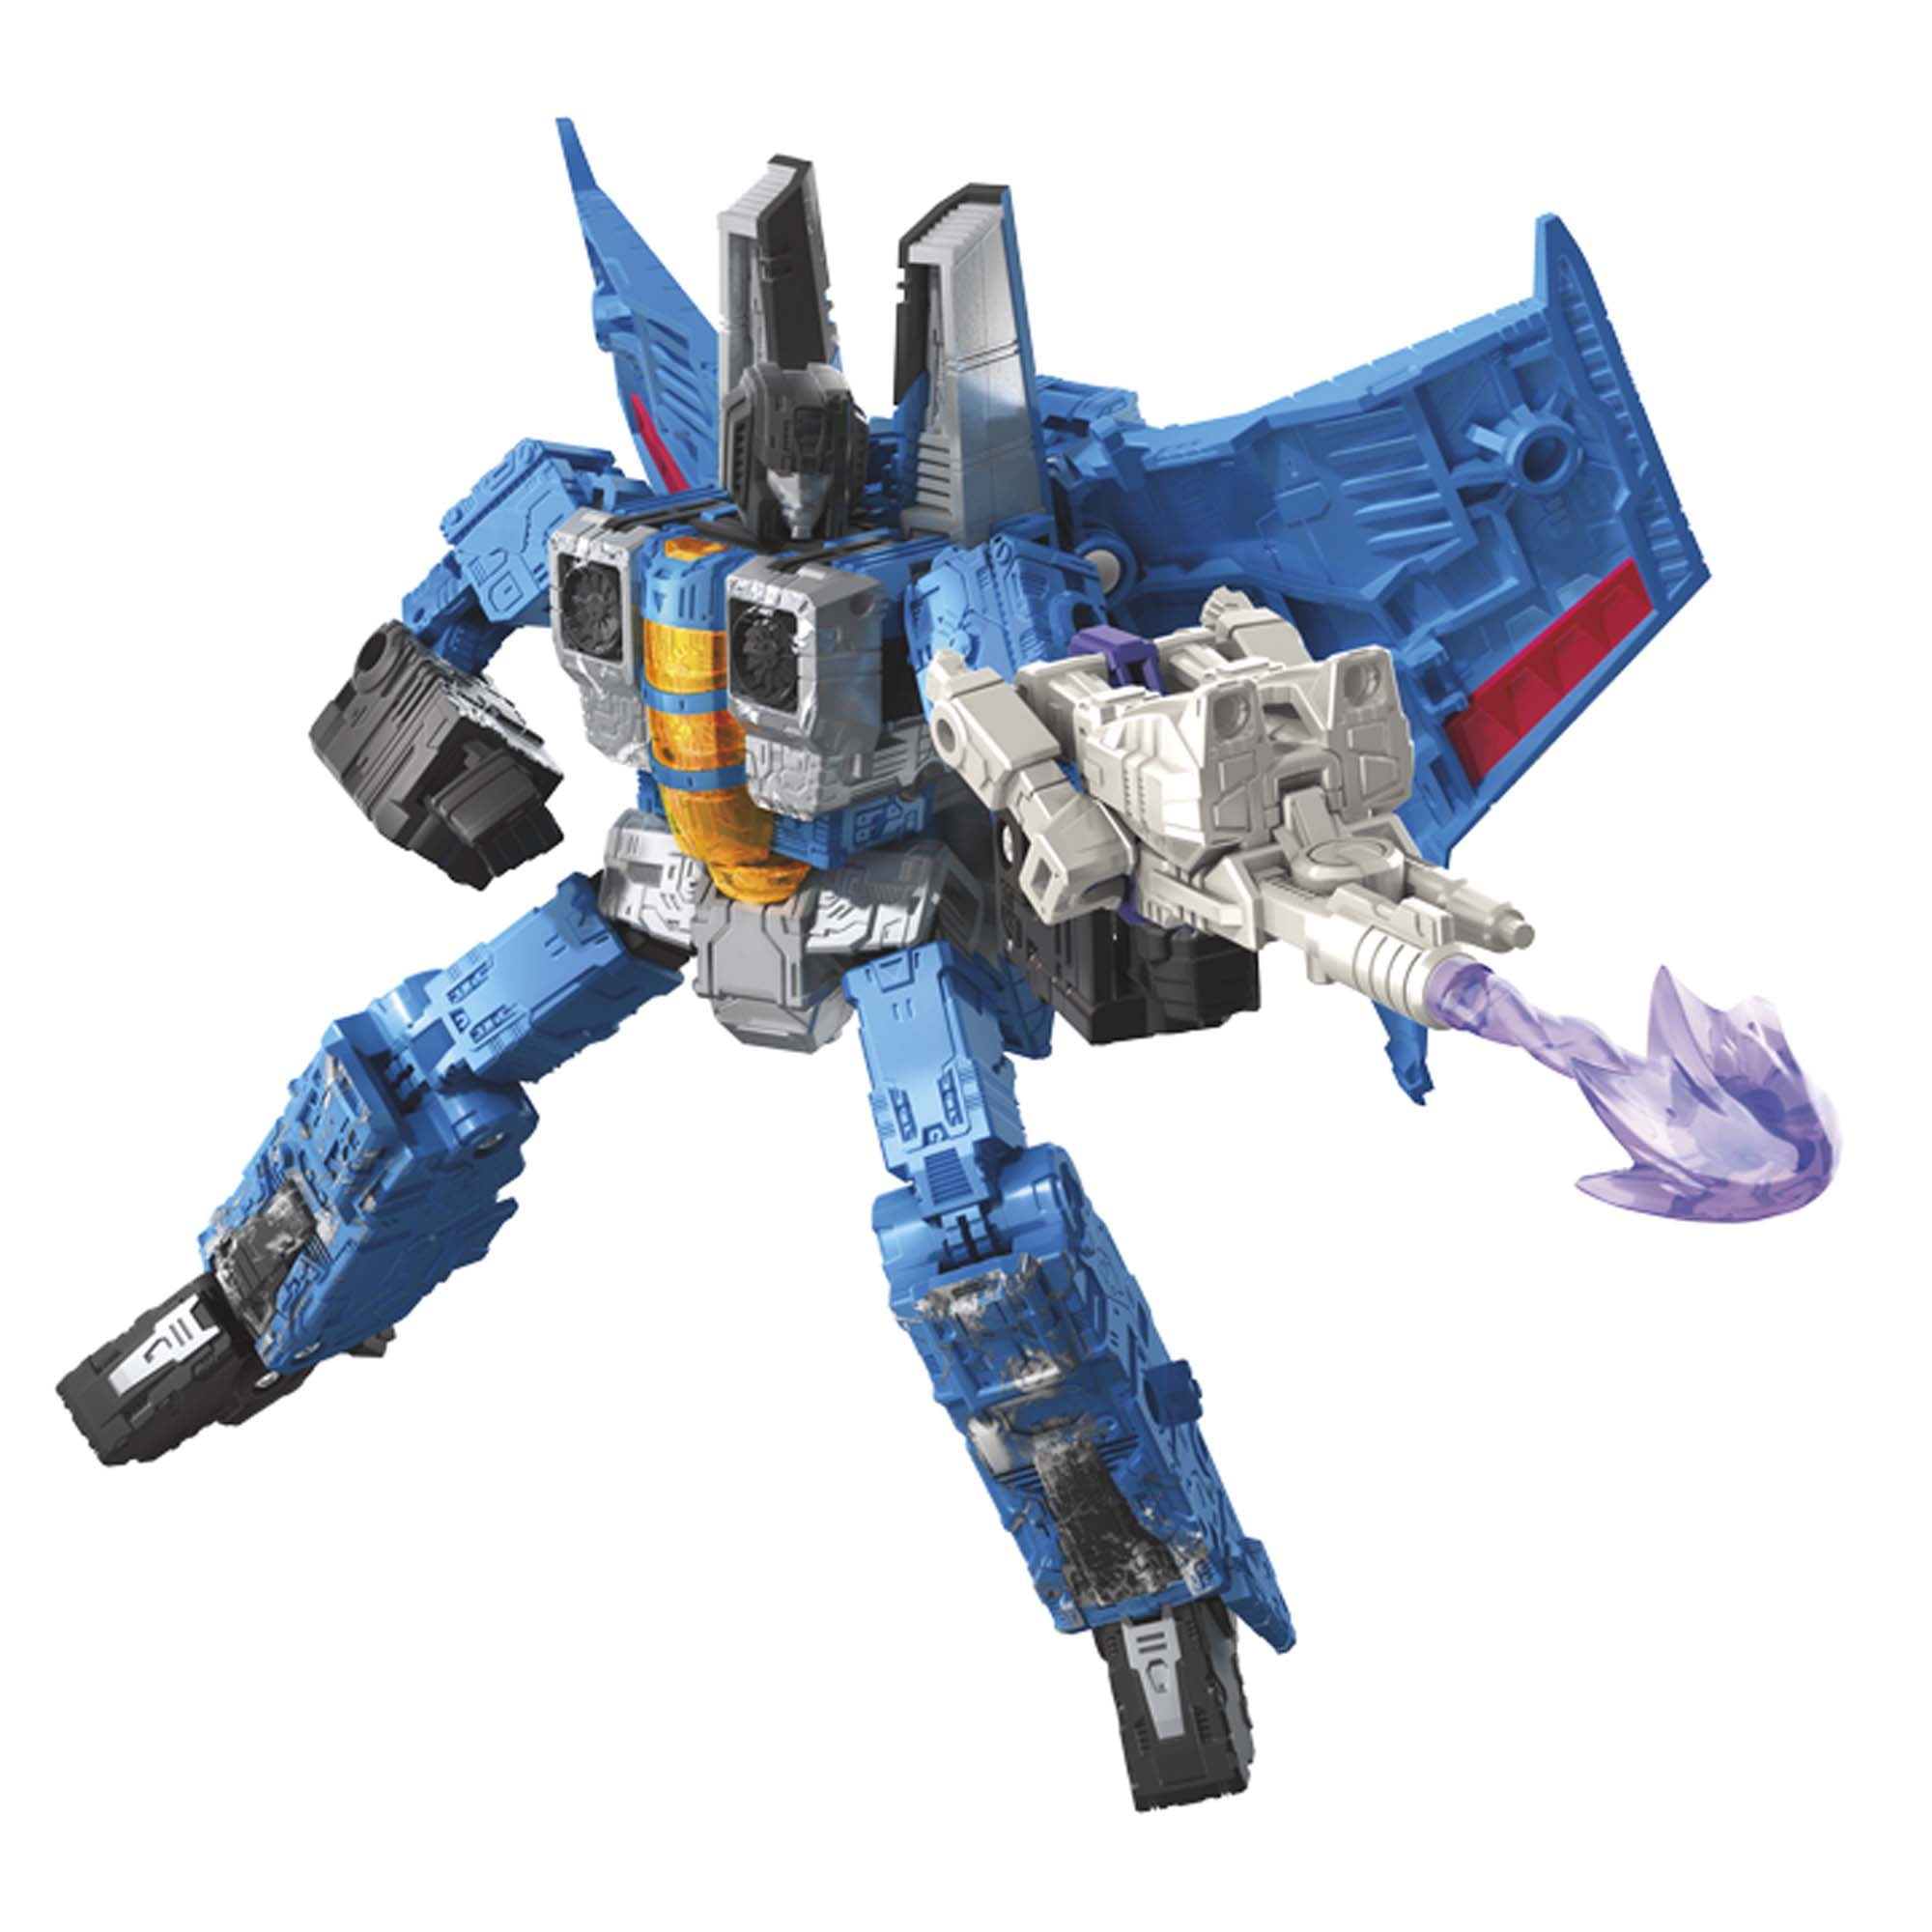 Hasbro Transformers 6 Thundercracker Collectible Action Figure for sale online 